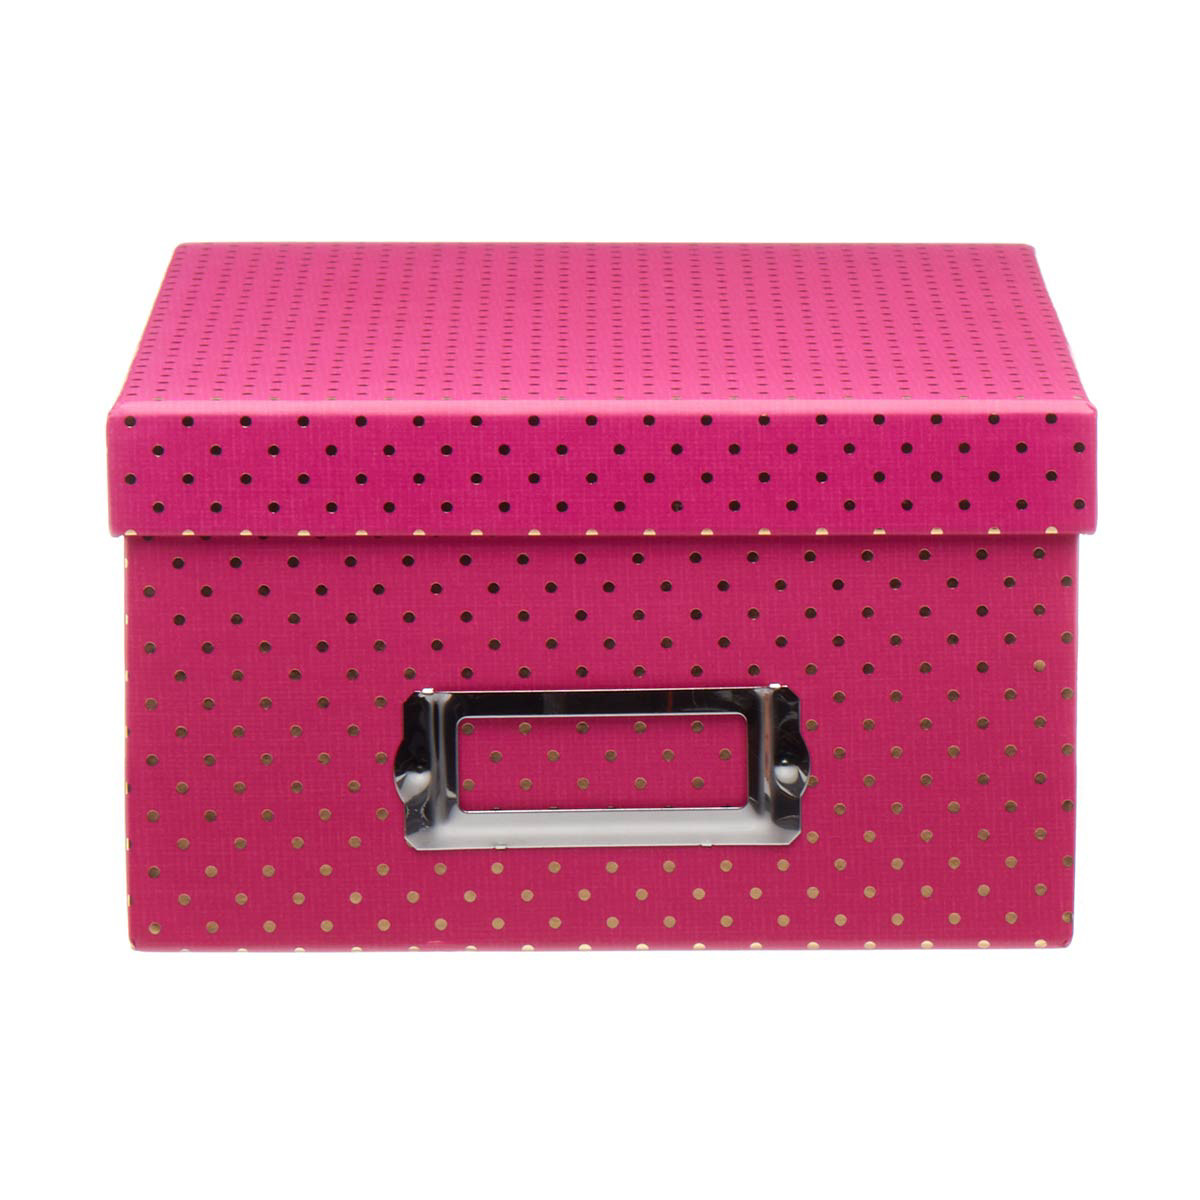 Hot Pink and Gold Dot Office Storage Box with Lid